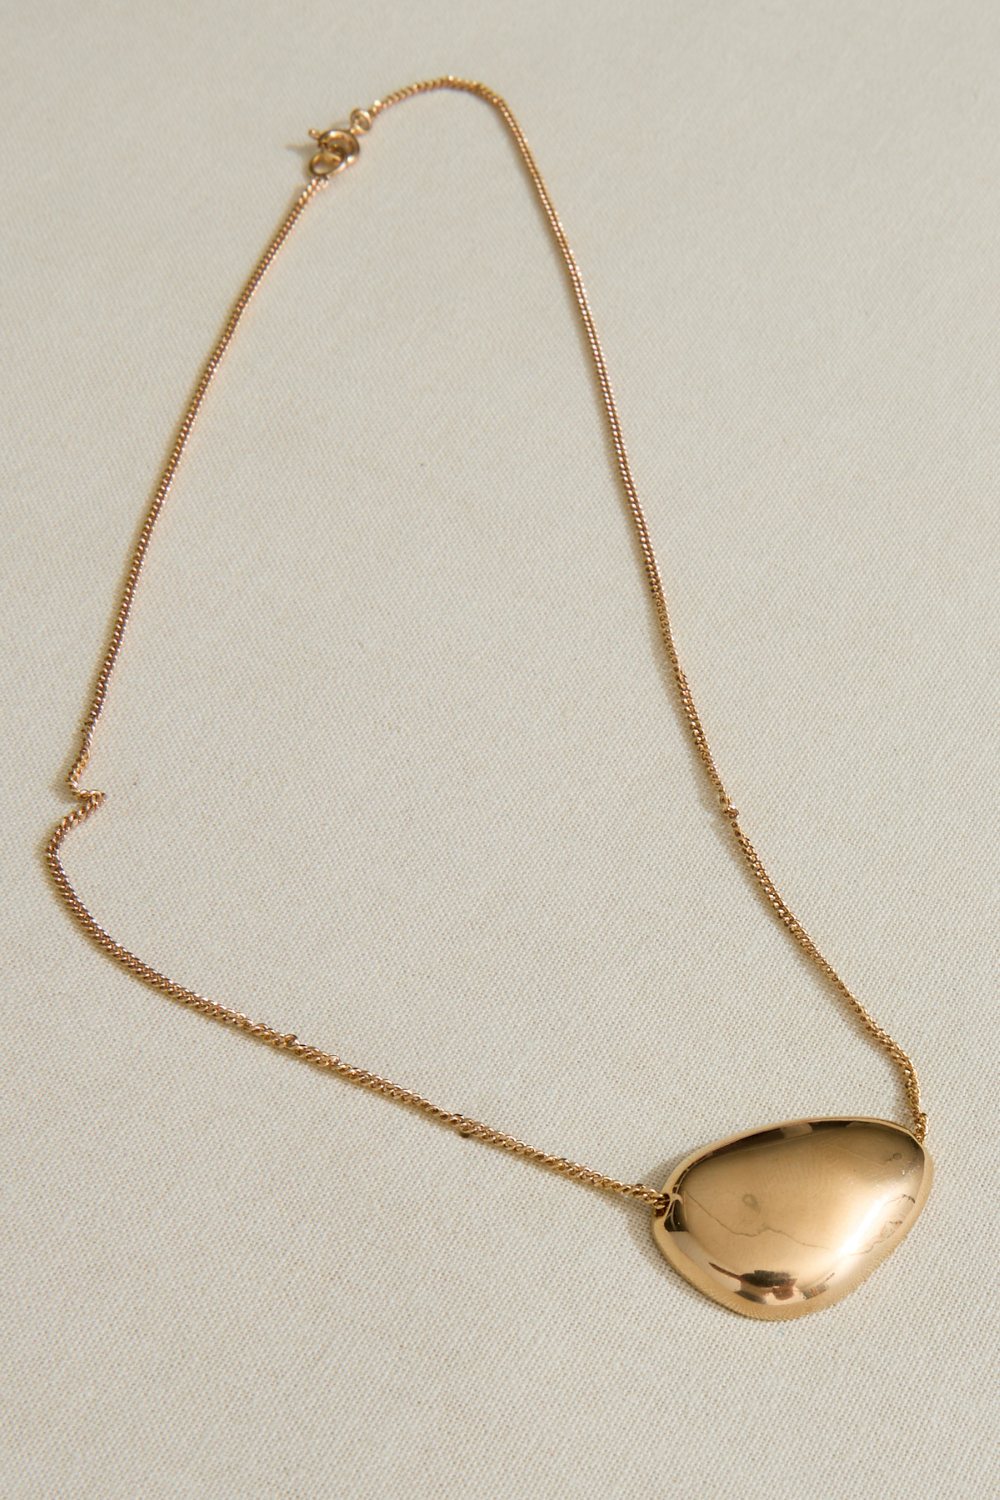 Formation Necklace - Gold - BY NYE